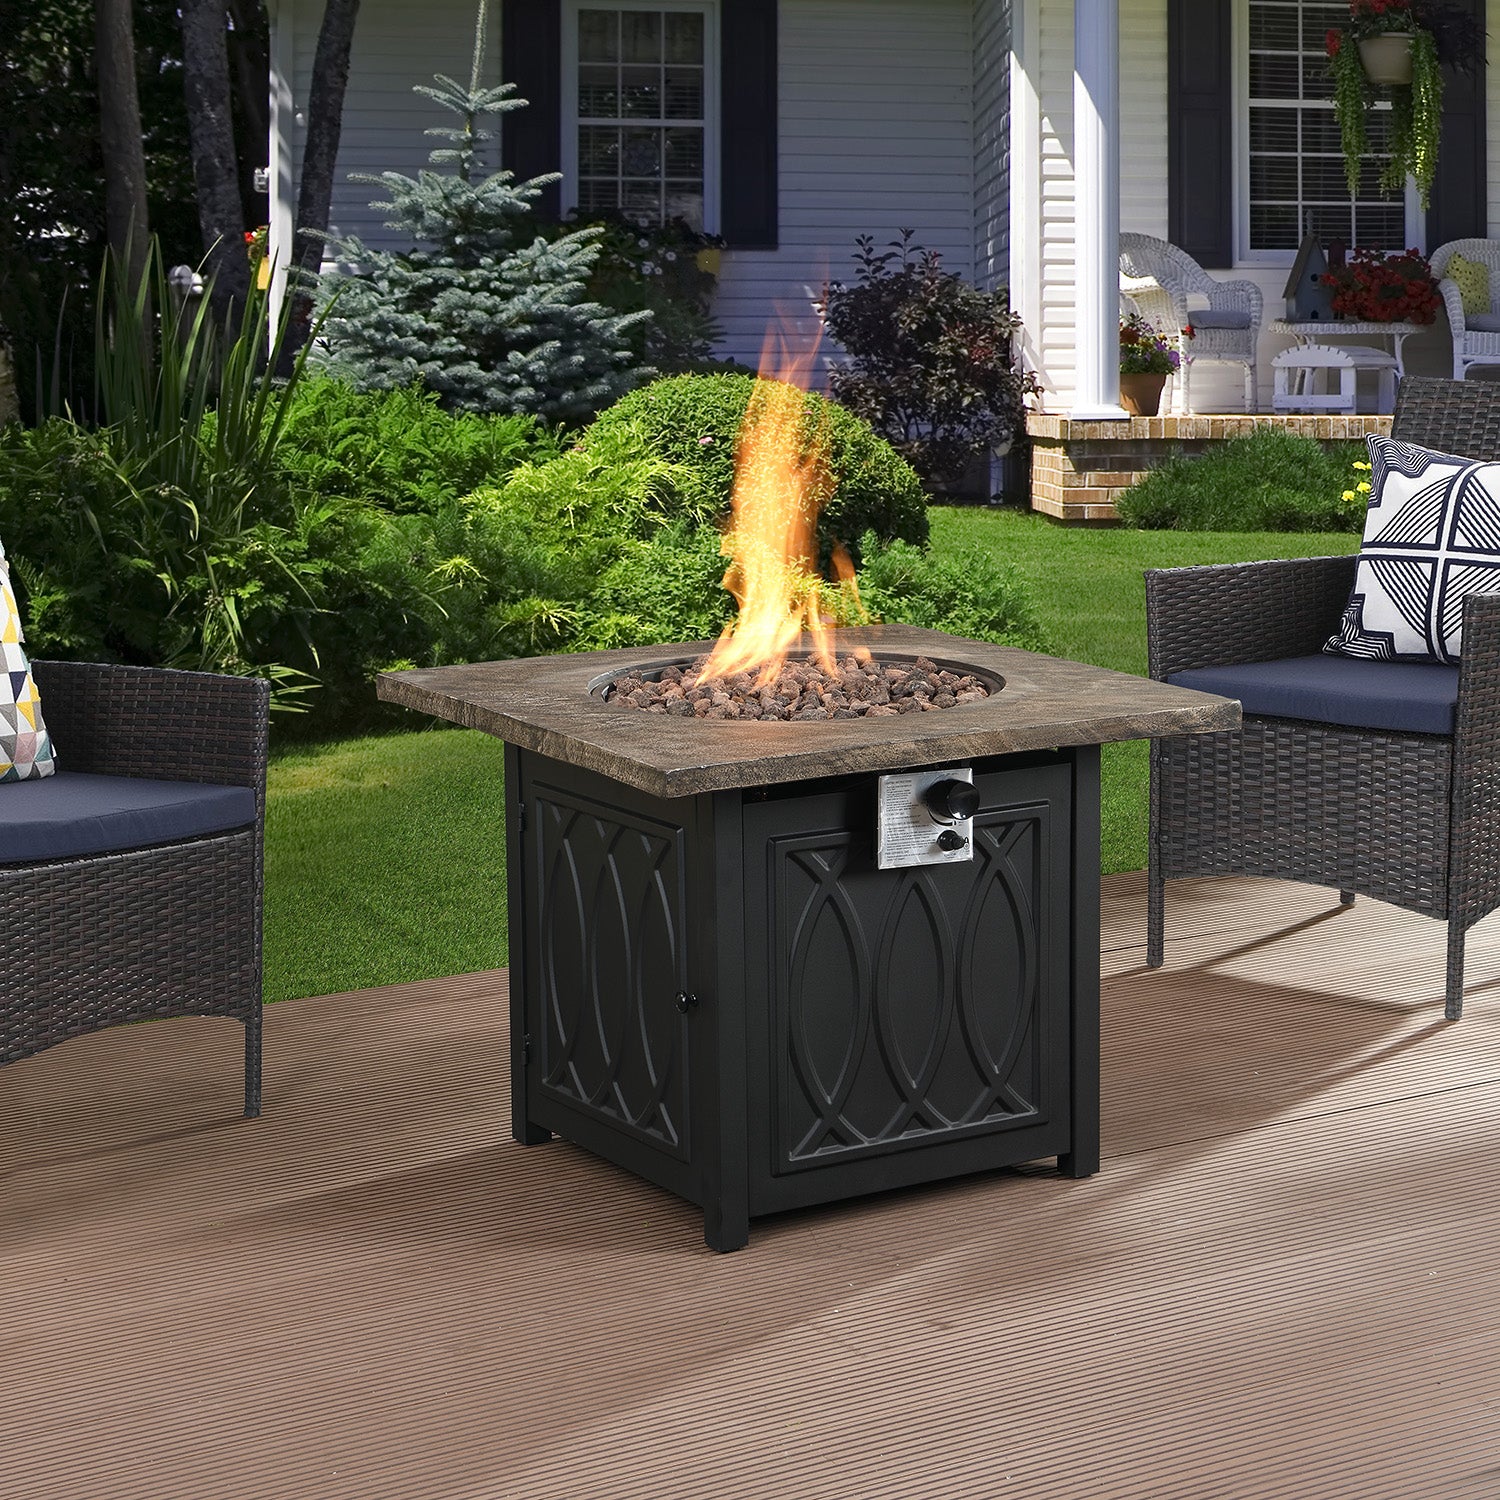 Brown Fire Pit Table, 32-inch Square 50,000 BTU Auto-Ignition Propane Gas Firepit with Waterproof Cover-Boyel Living